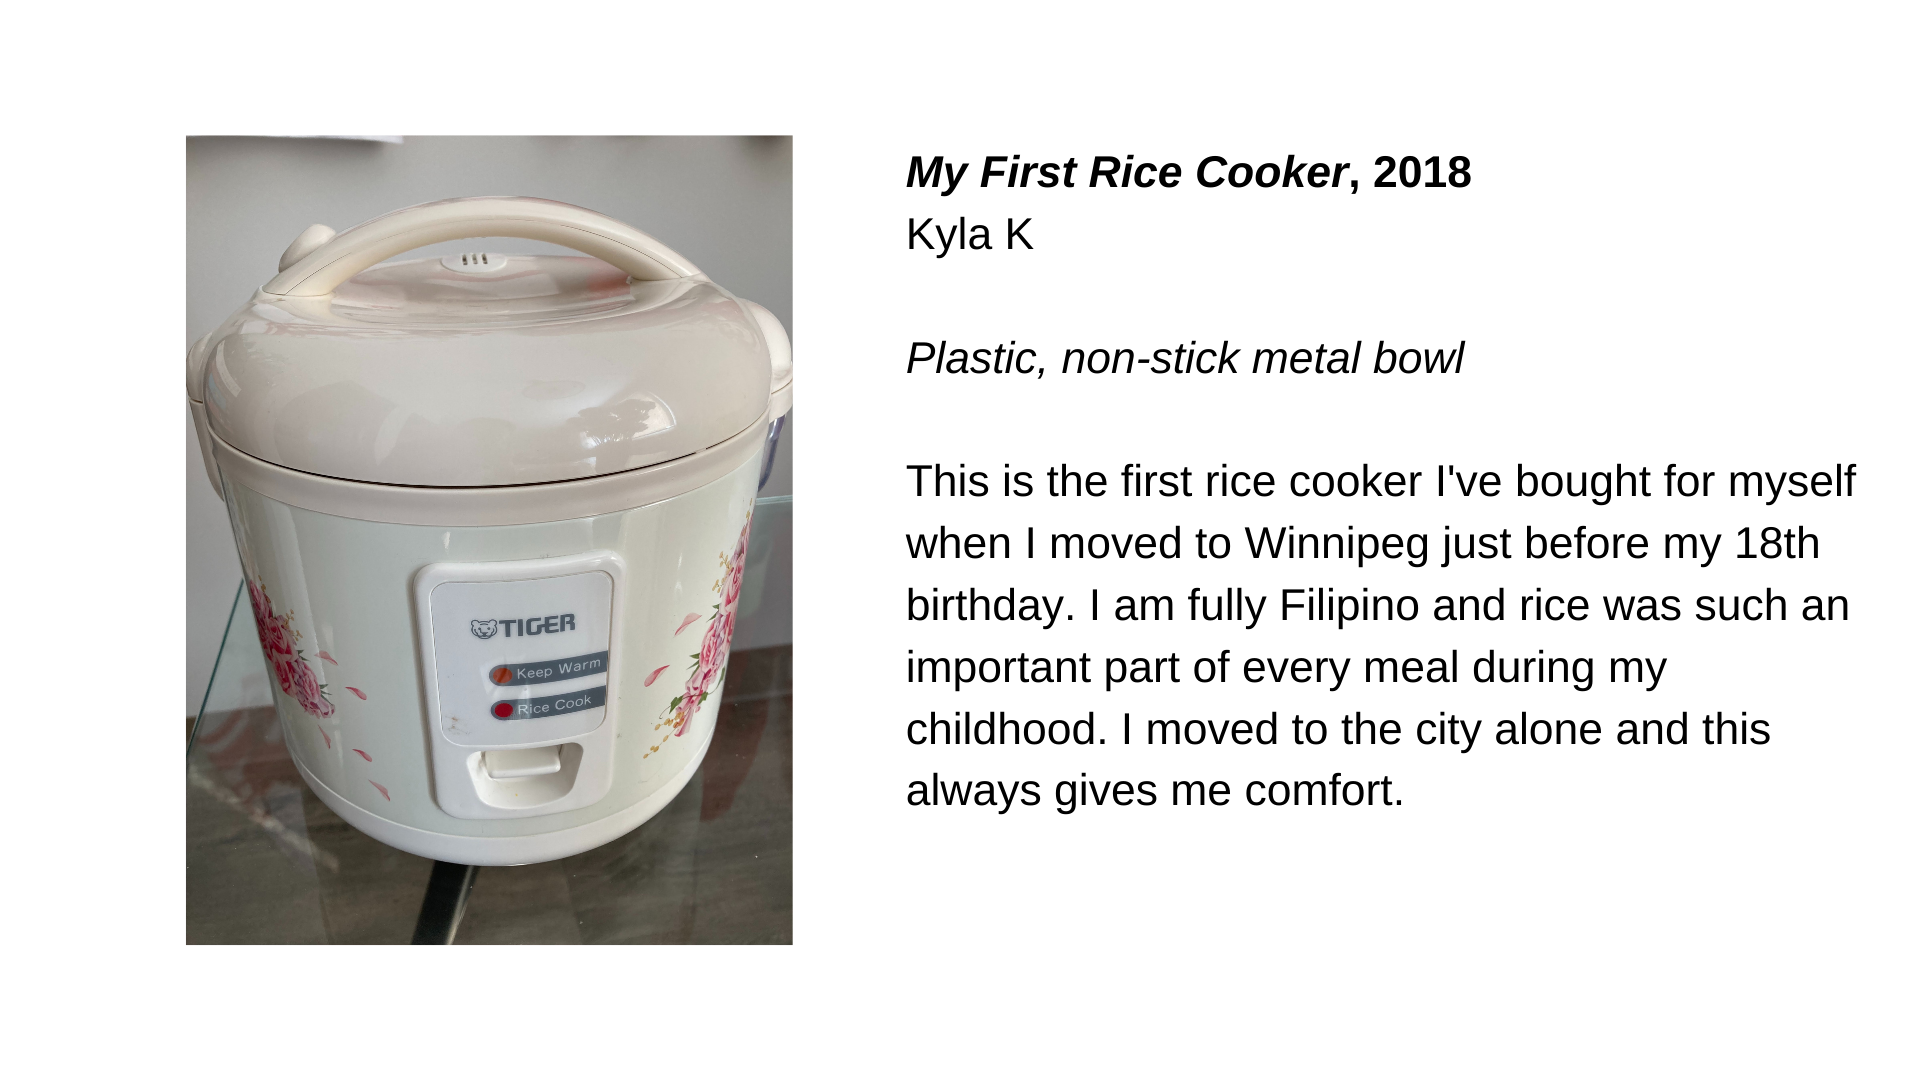  A white rice cooker with the following text next to it: “My First Rice Cooker, 2018 - Kyla K. Plastic, non-stick metal bowl. This is the first rice cooker I've bought for myself when I moved to Winnipeg just before my 18th birthday. I am fully Filip